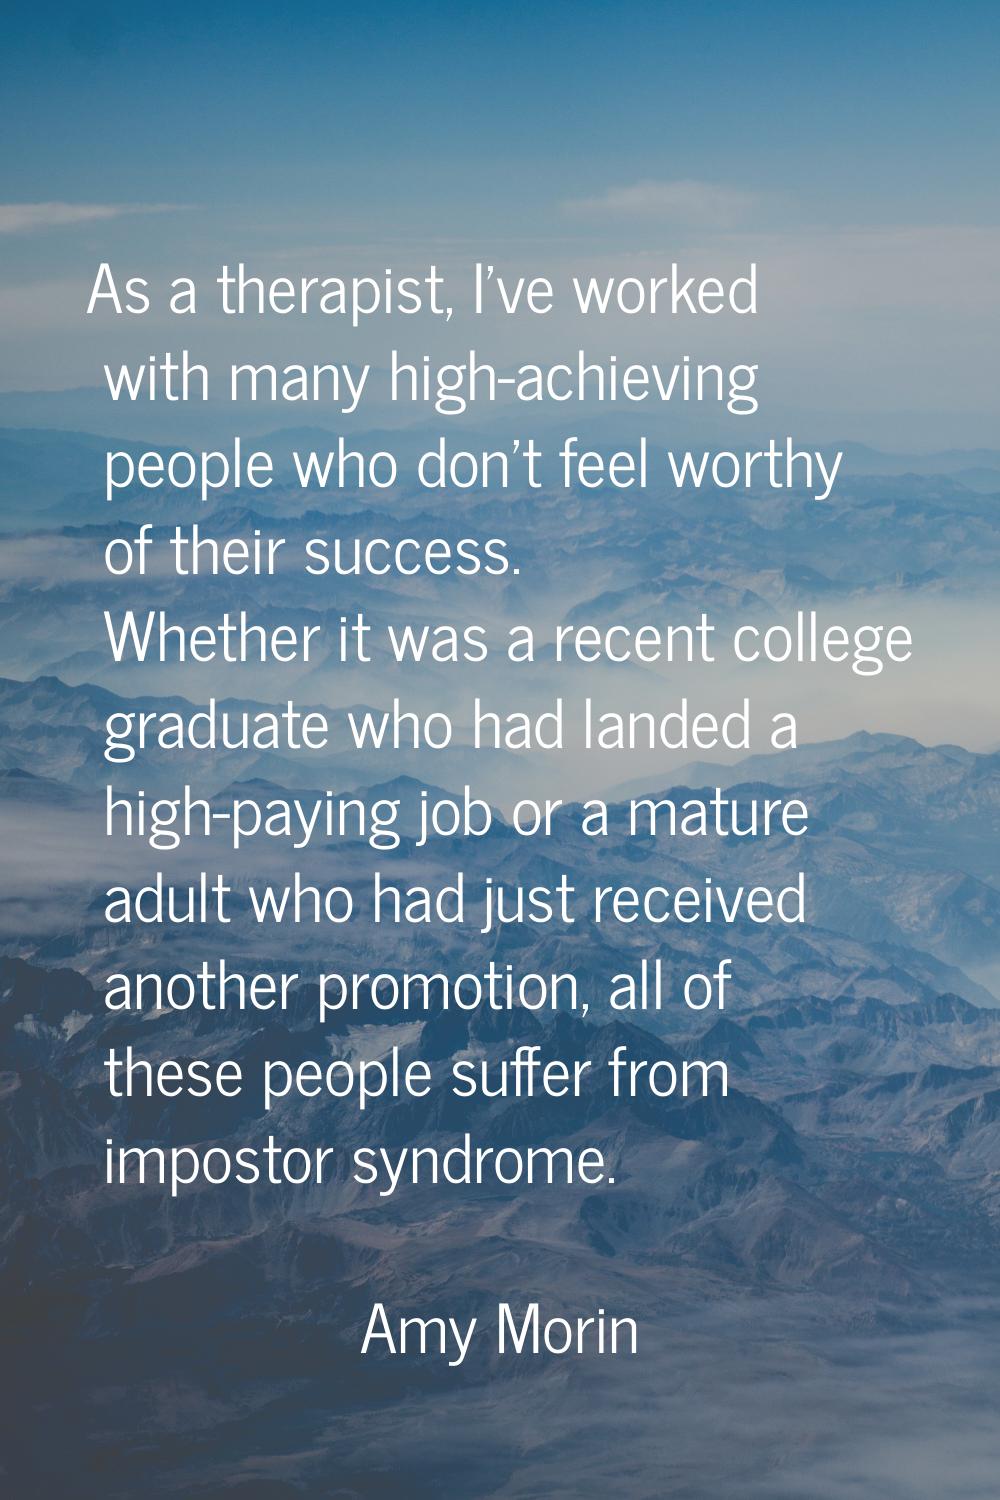 As a therapist, I've worked with many high-achieving people who don't feel worthy of their success.